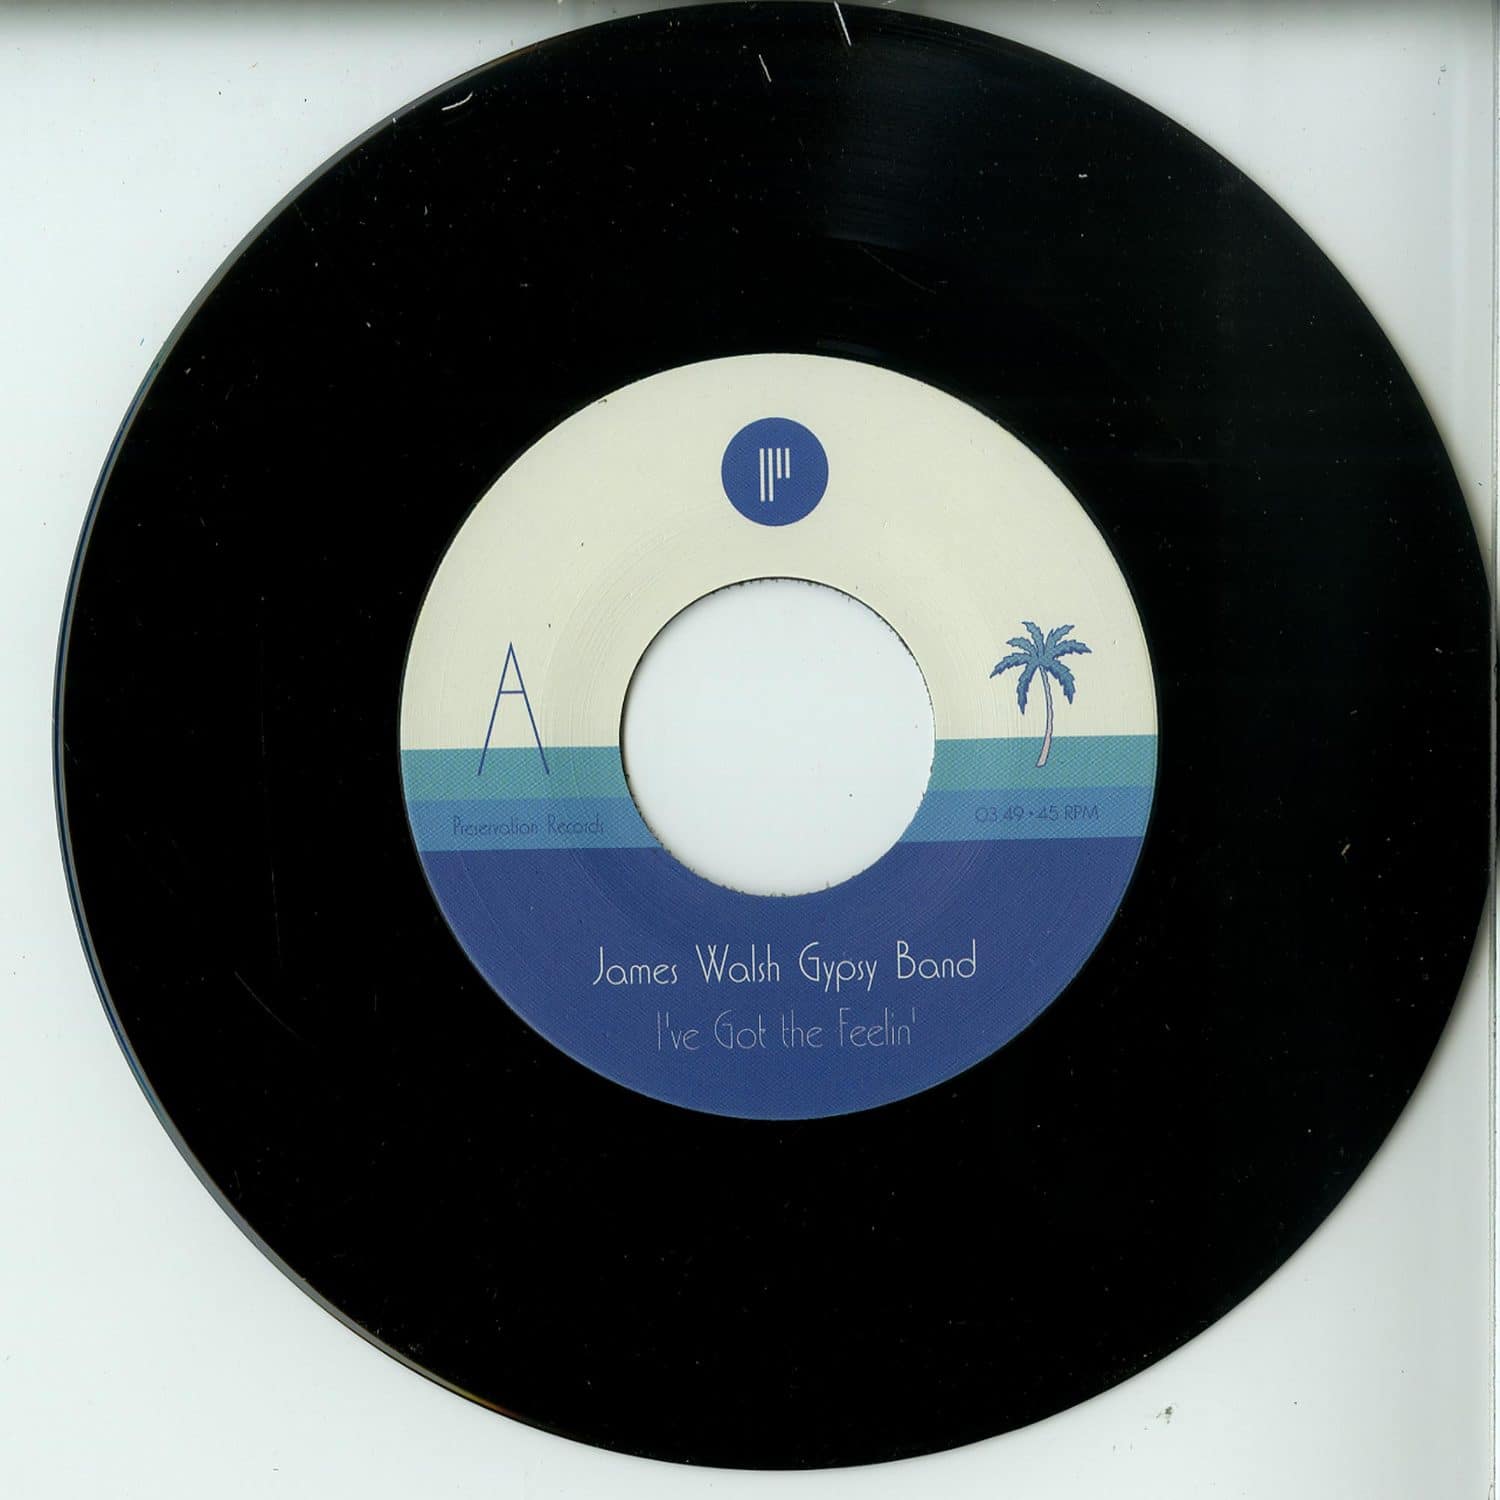 James Walsh Gypsy Band - IVE GOT THE FEELIN / CAVES OF ALTAMIRA 